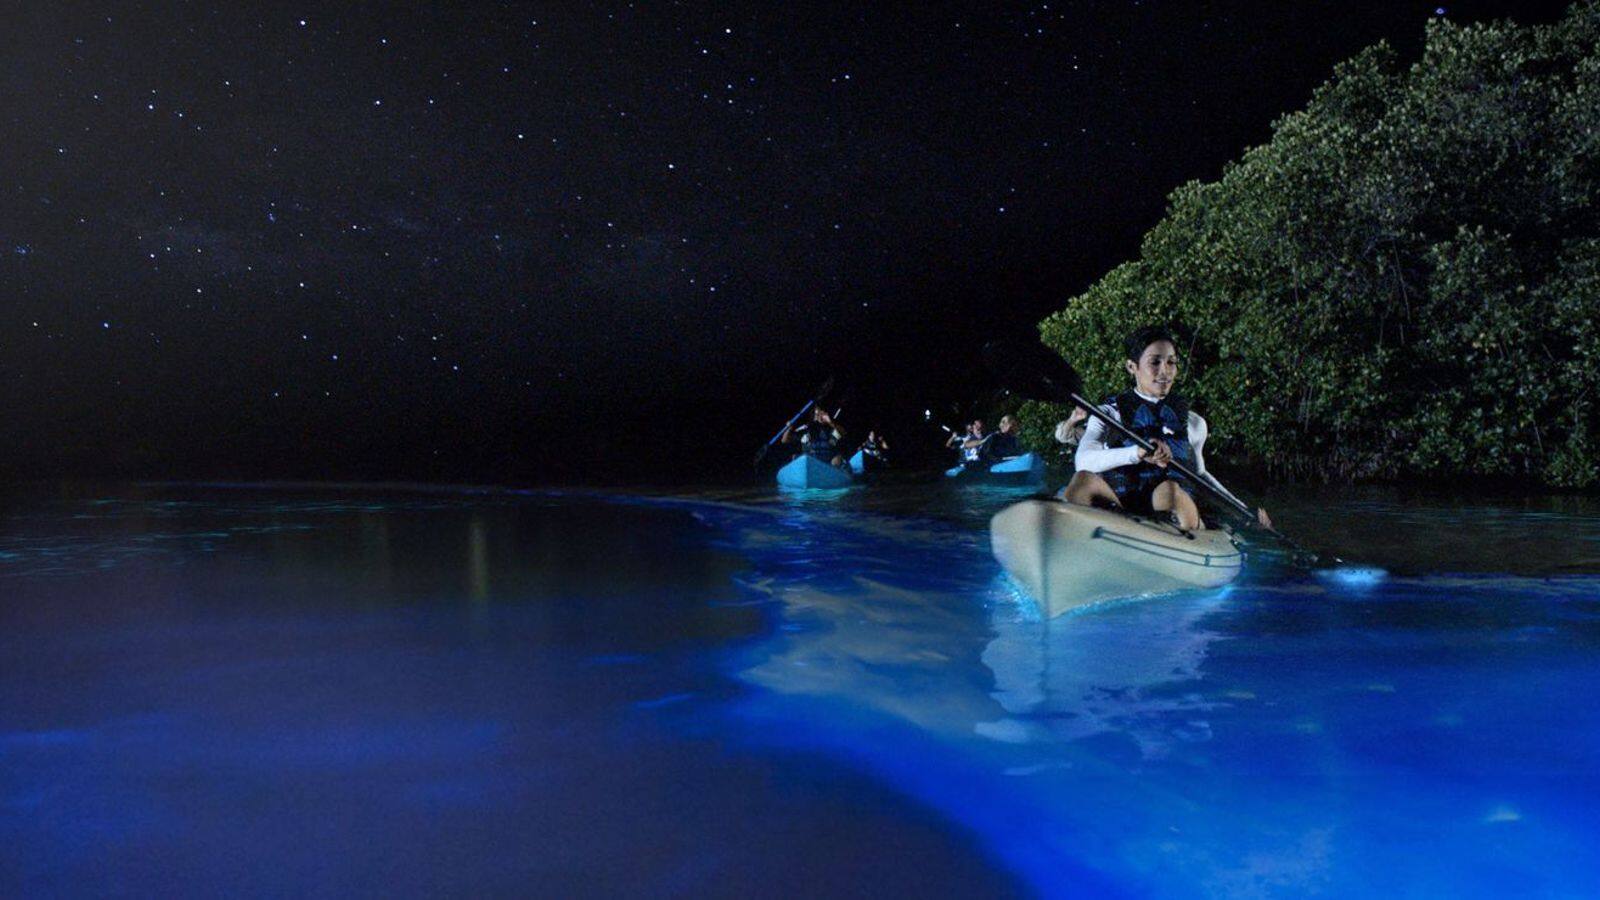 Kayaking in Puerto Rico's bioluminescent bays: A planning guide